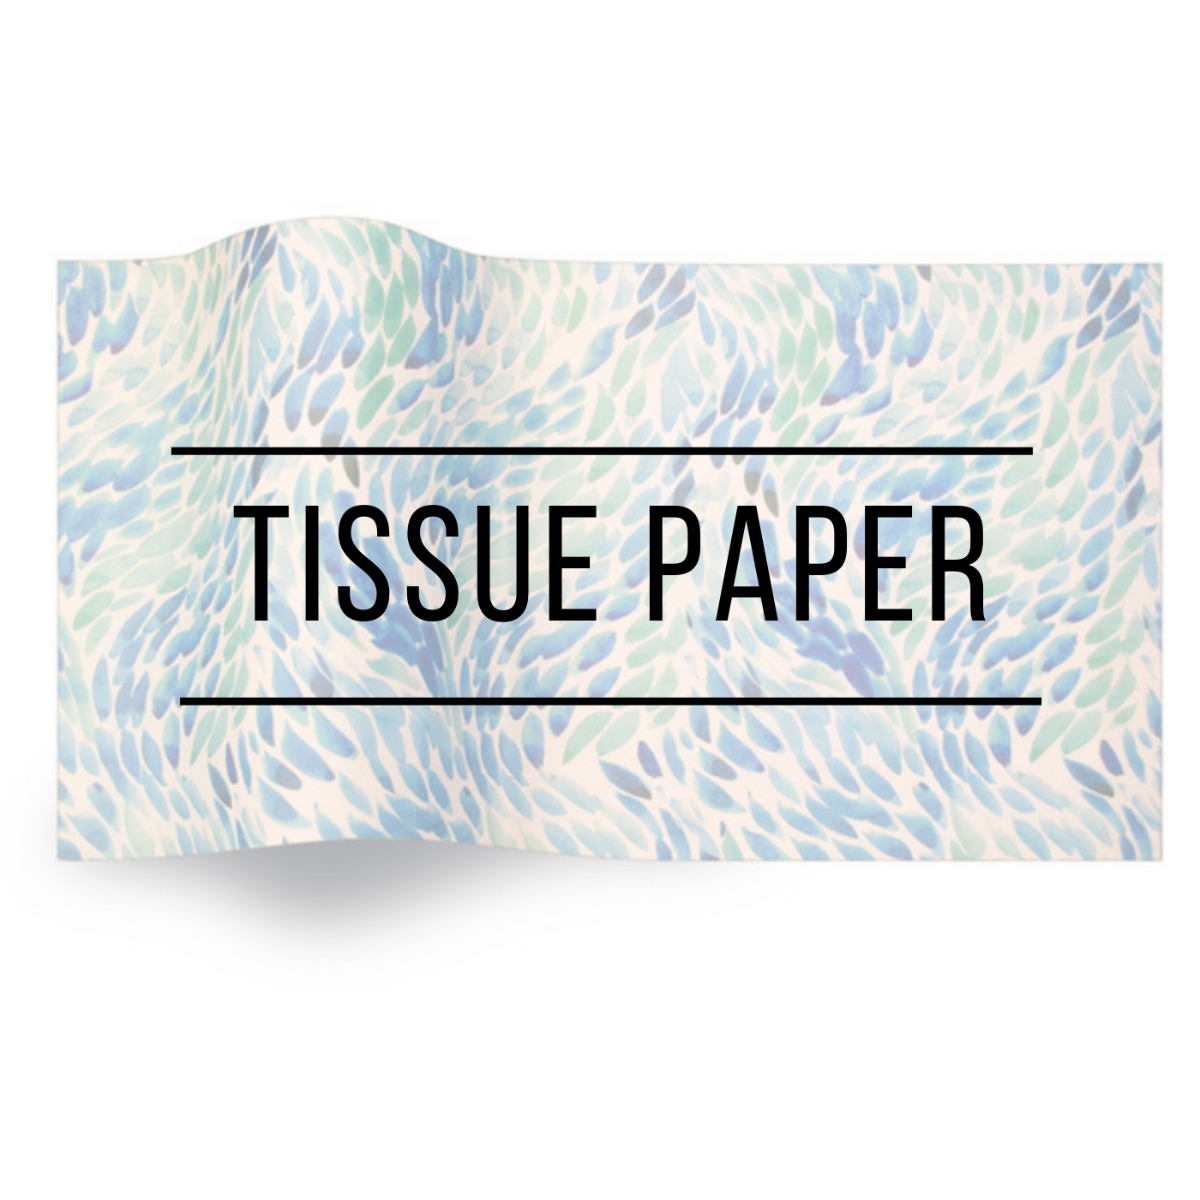 Shop Hawaii Tissue Papers in solid color or special designs.